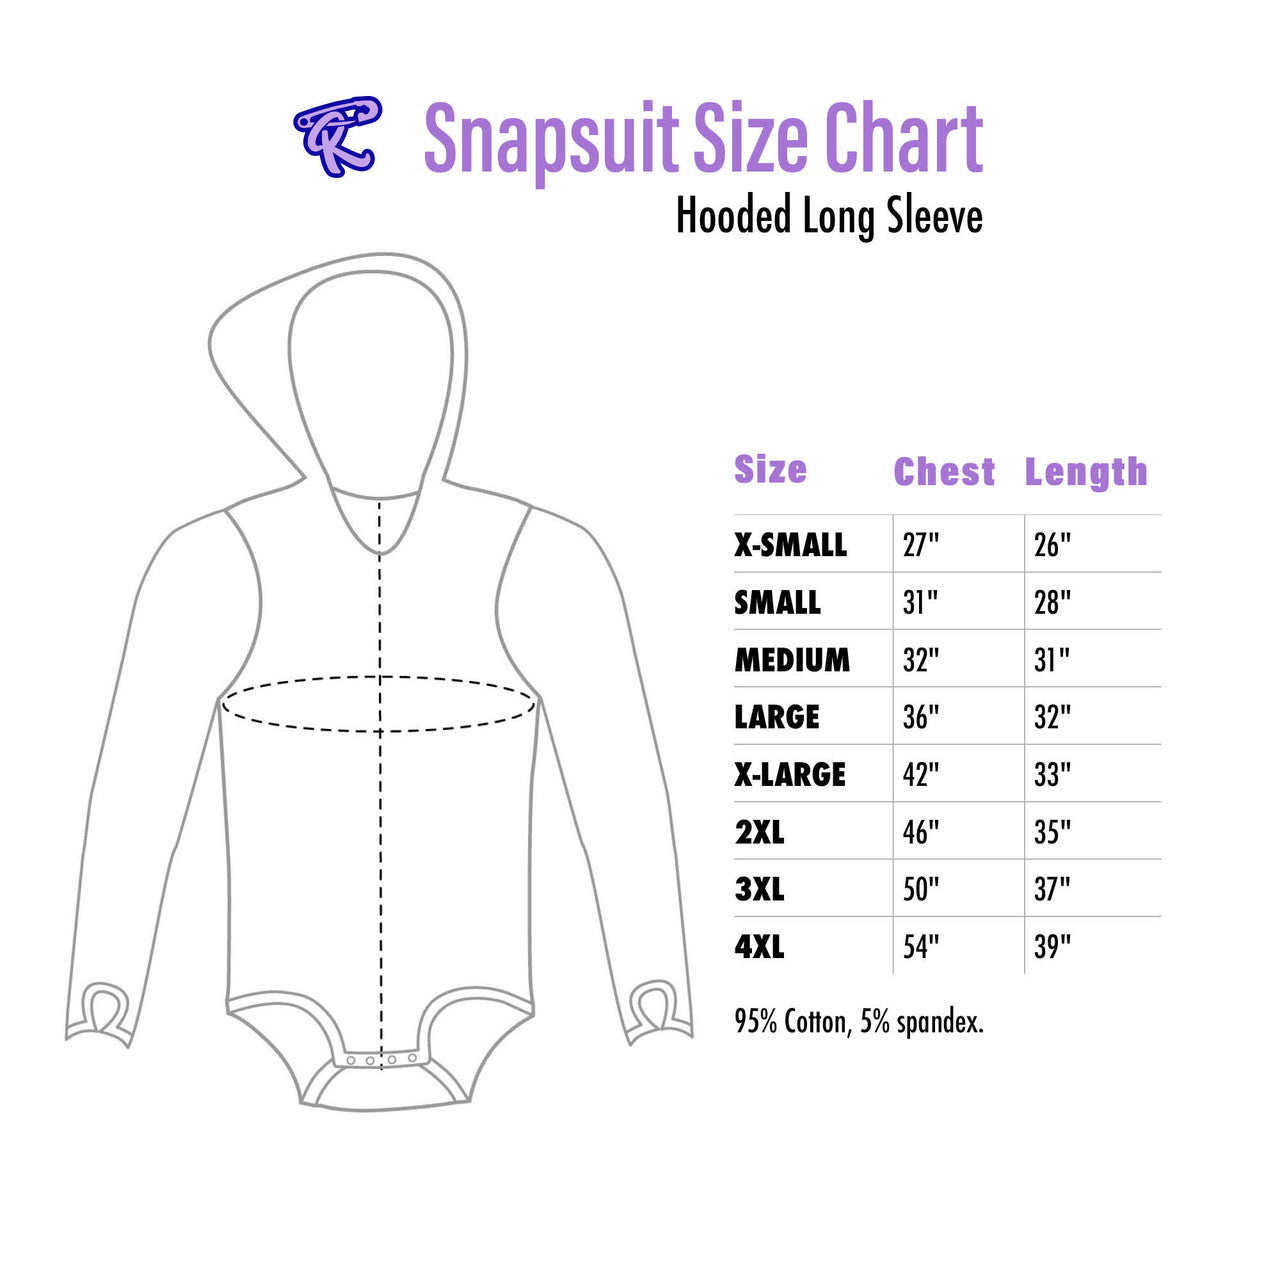 Rearz - Hooded Snapsuit - Critter Caboose